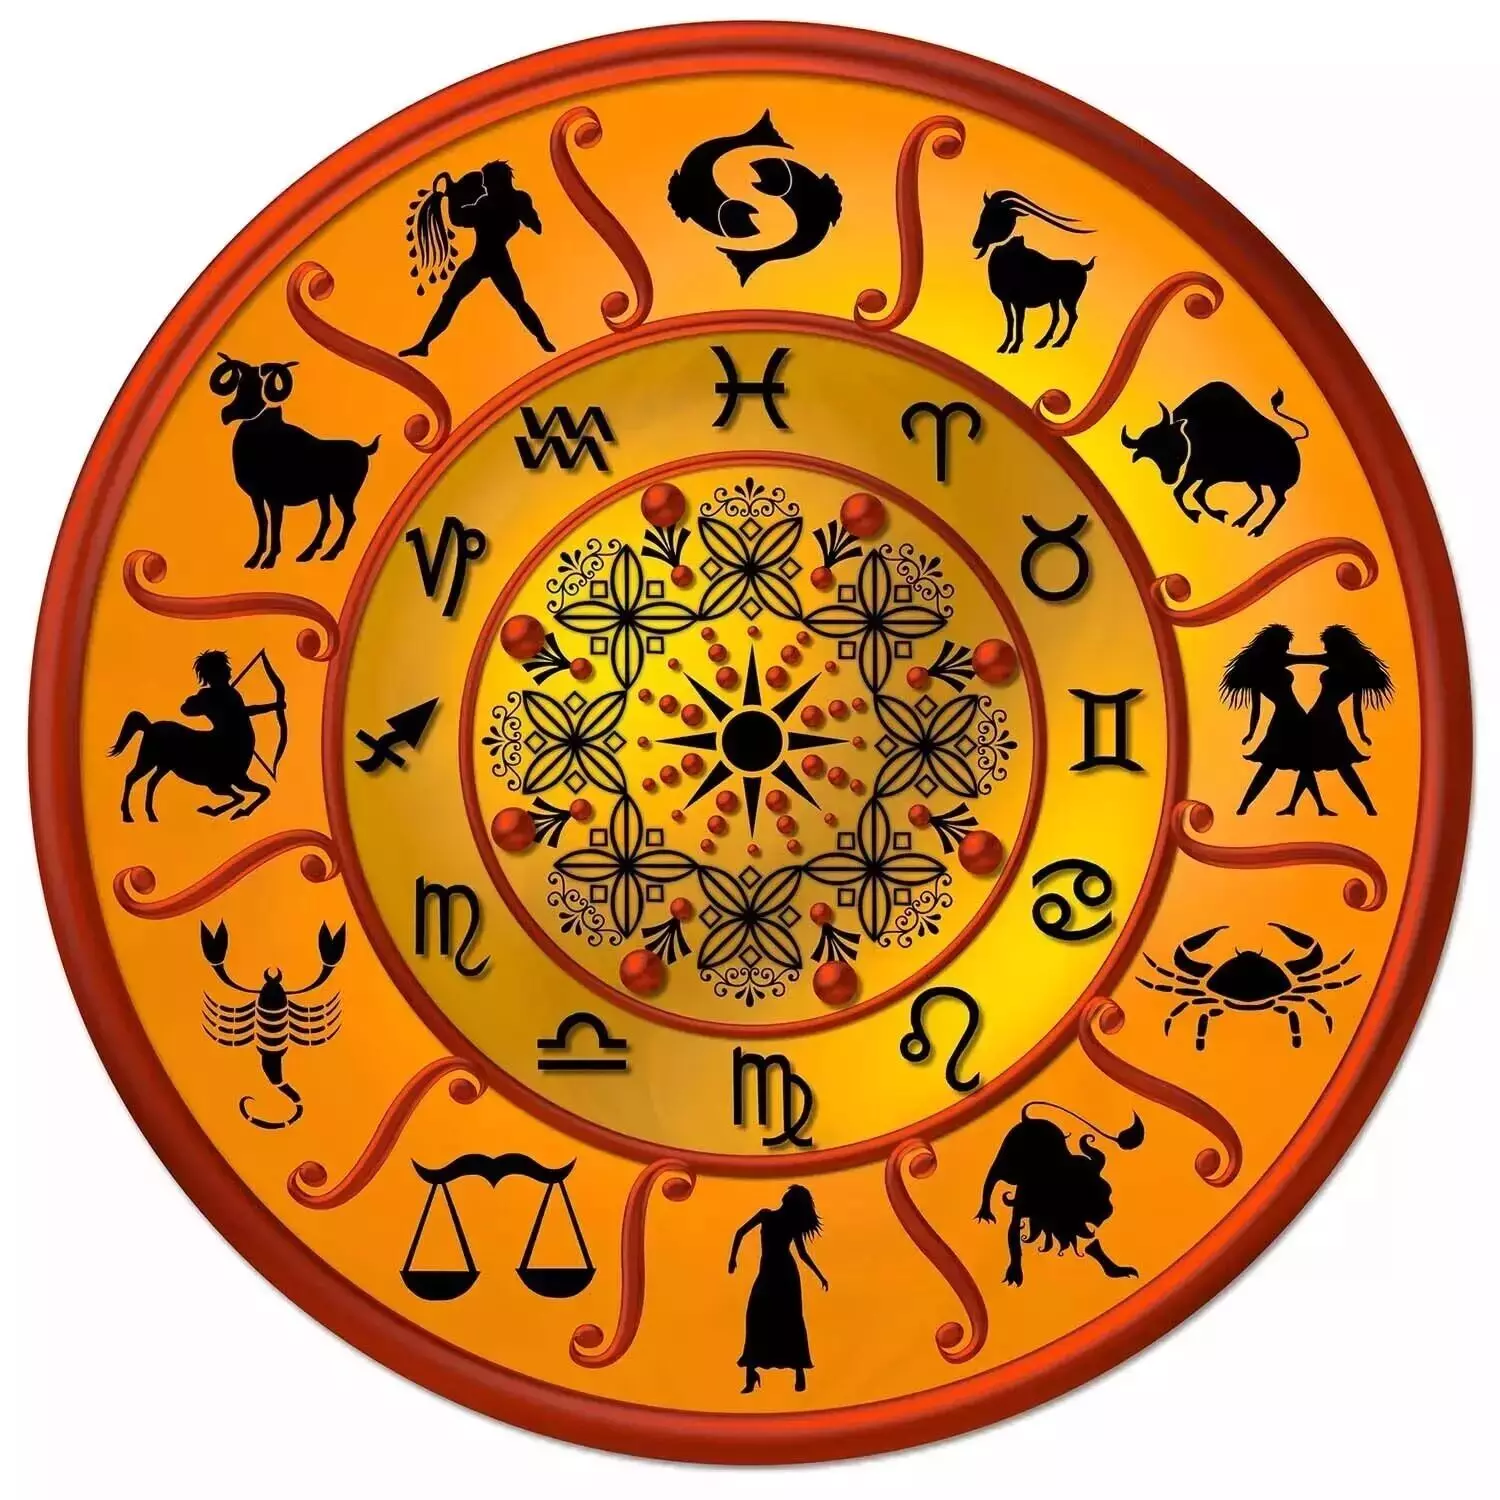 05 August  – Know your todays horoscope